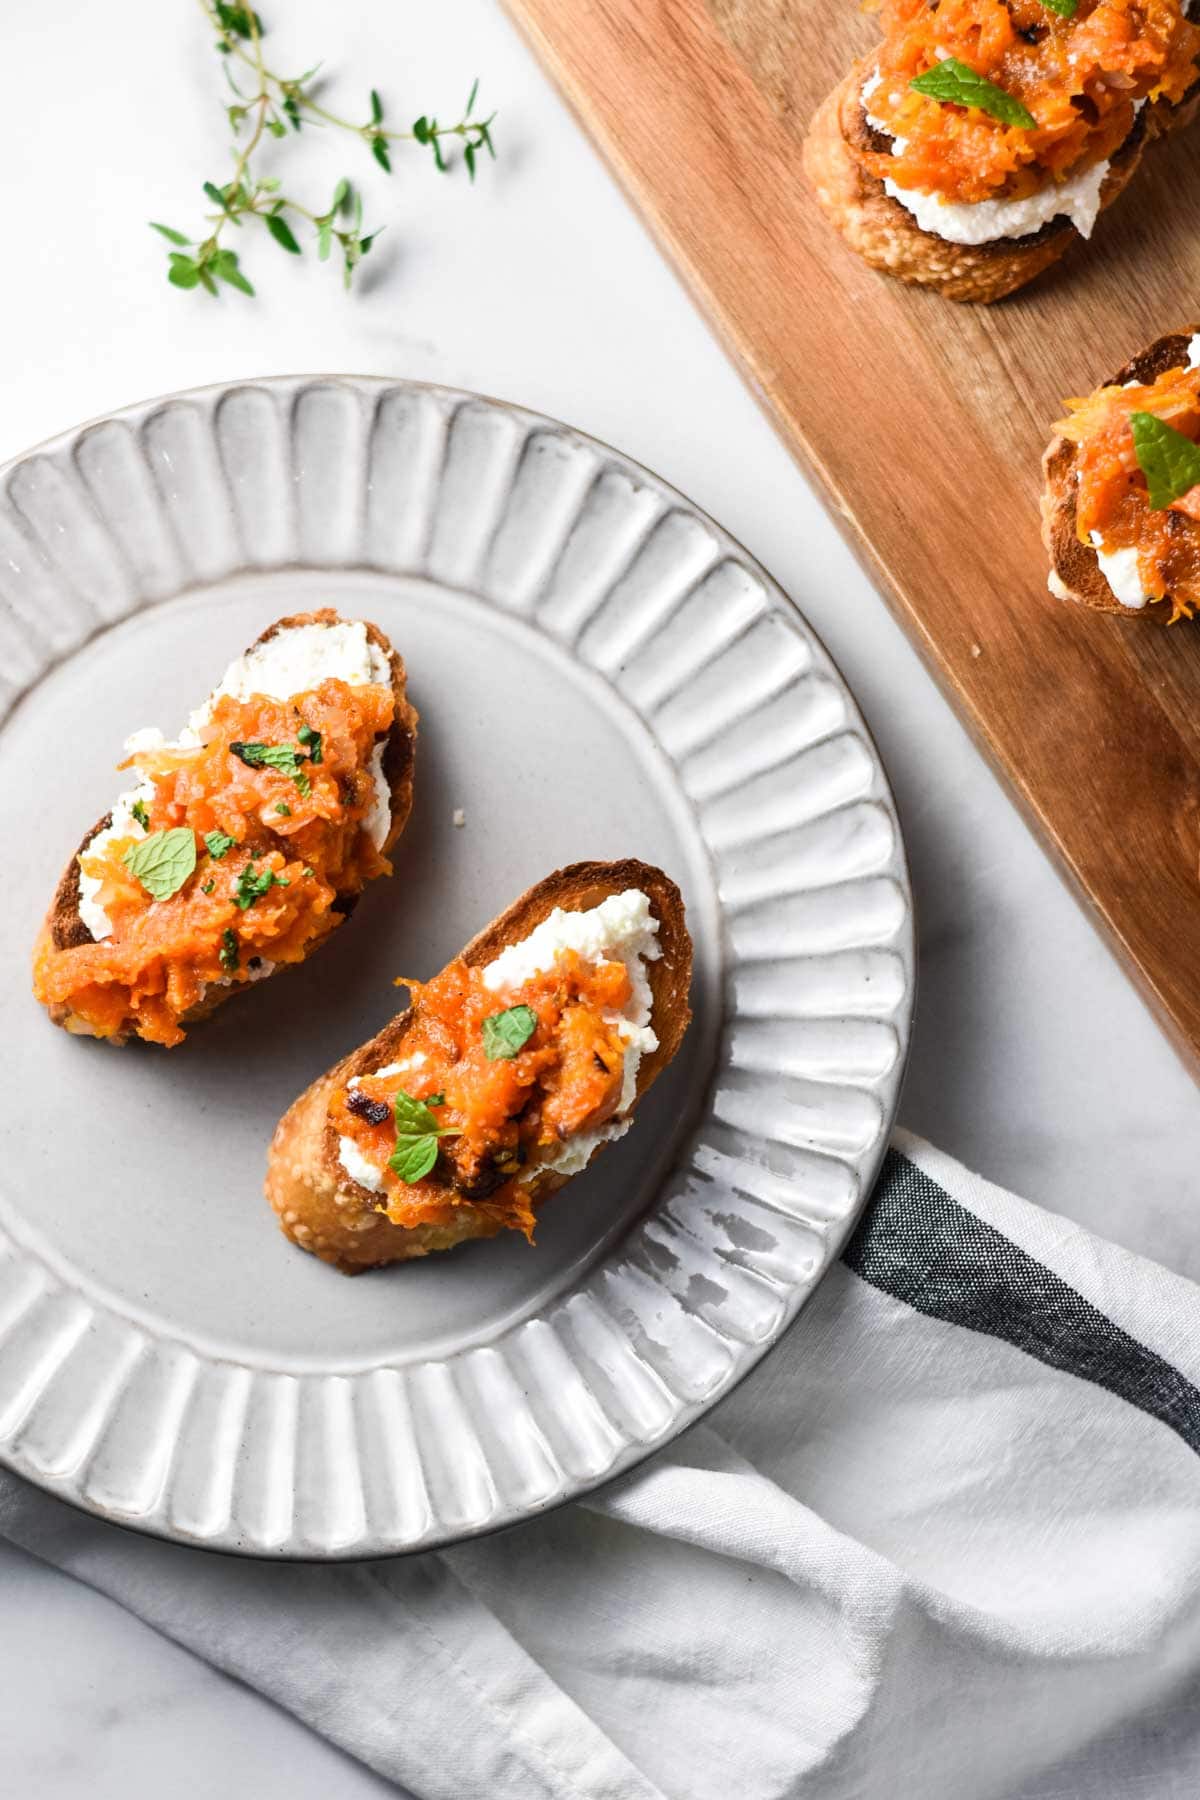 A plate of butternut squash appetizers next to a cutting board with crostini.